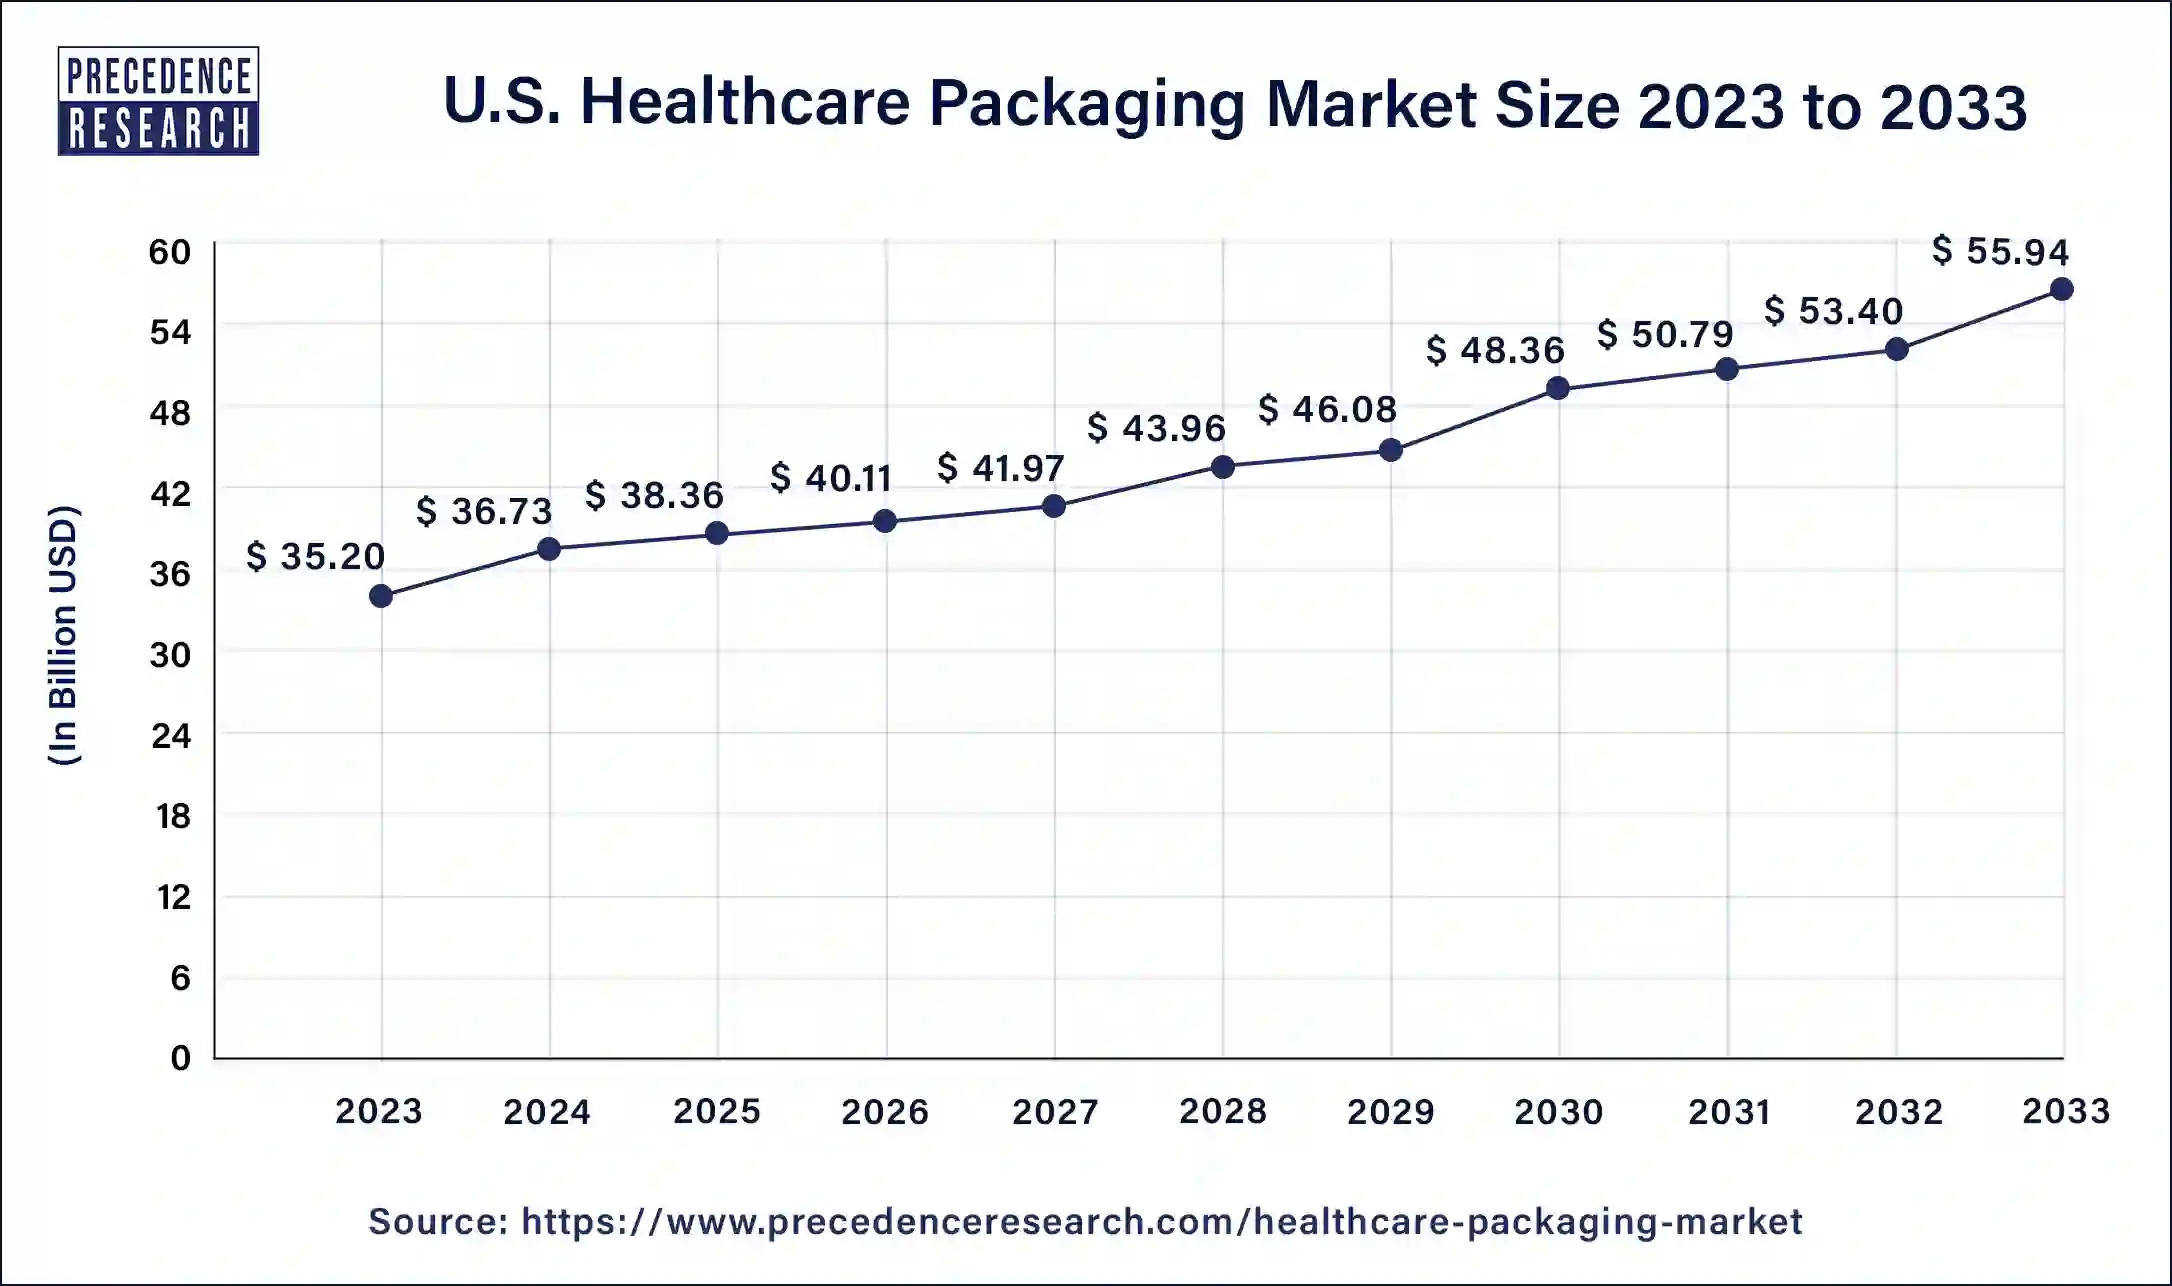 U.S. Healthcare Packaging Market Size 2024 to 2033